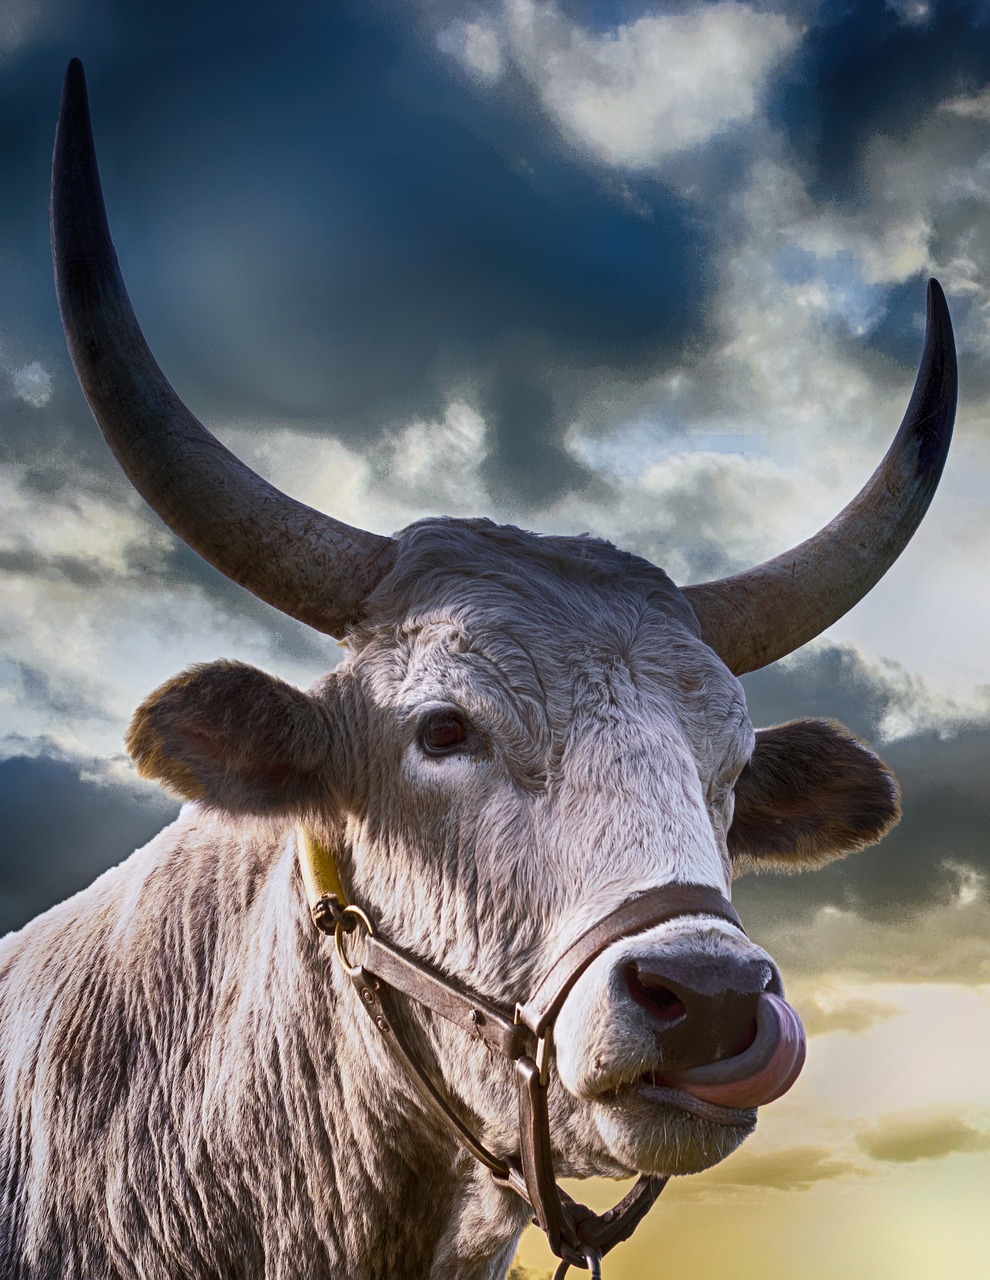 a close up of a cow's face with a cloudy sky in the background, a stock photo, by Matthias Weischer, surrealism, moon bull samurai, curved horns!, version 3, crypto